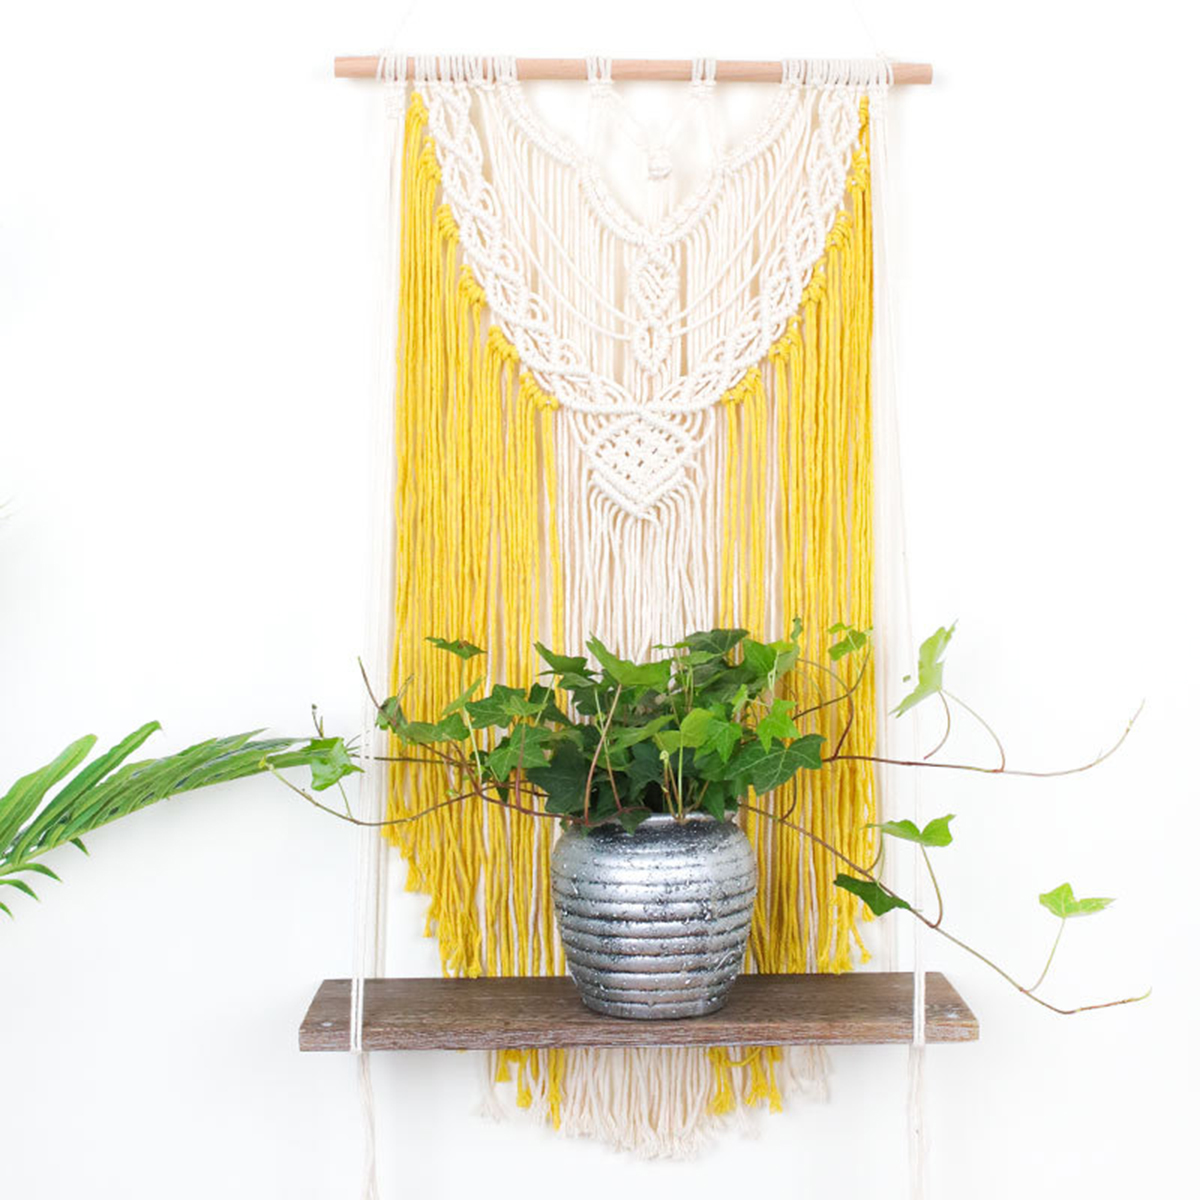 Wall-mounted-Lace-Woven-Macrame-Plant-Hanger-Wall-Cotton-Rope-Tapestry-Shelf-1727270-5